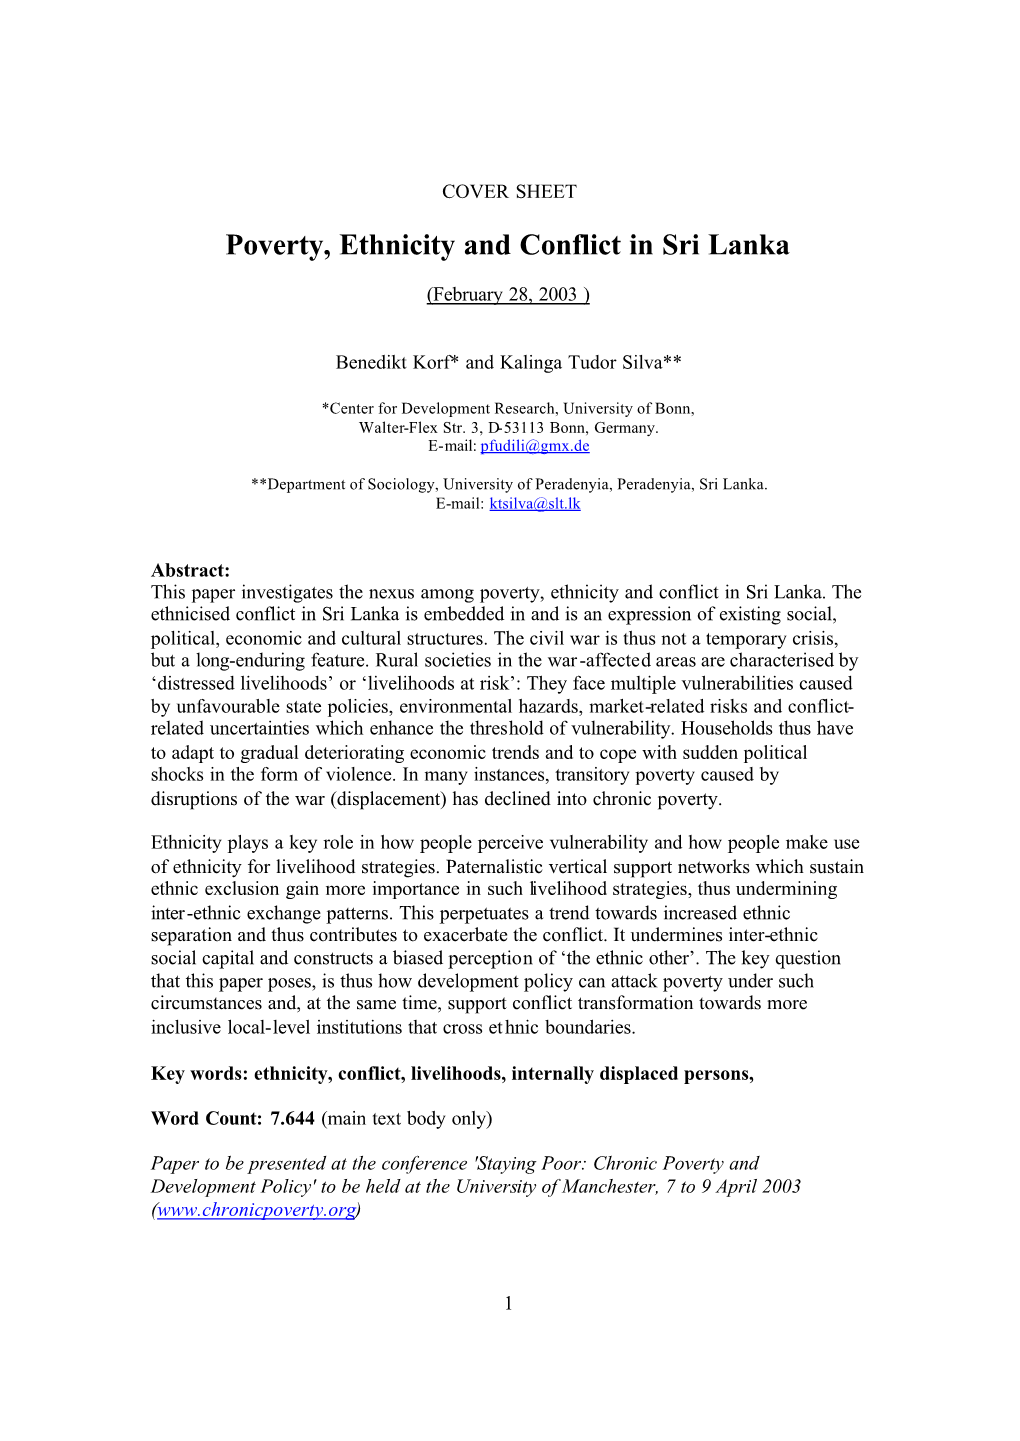 Poverty, Ethnicity and Conflict in Sri Lanka